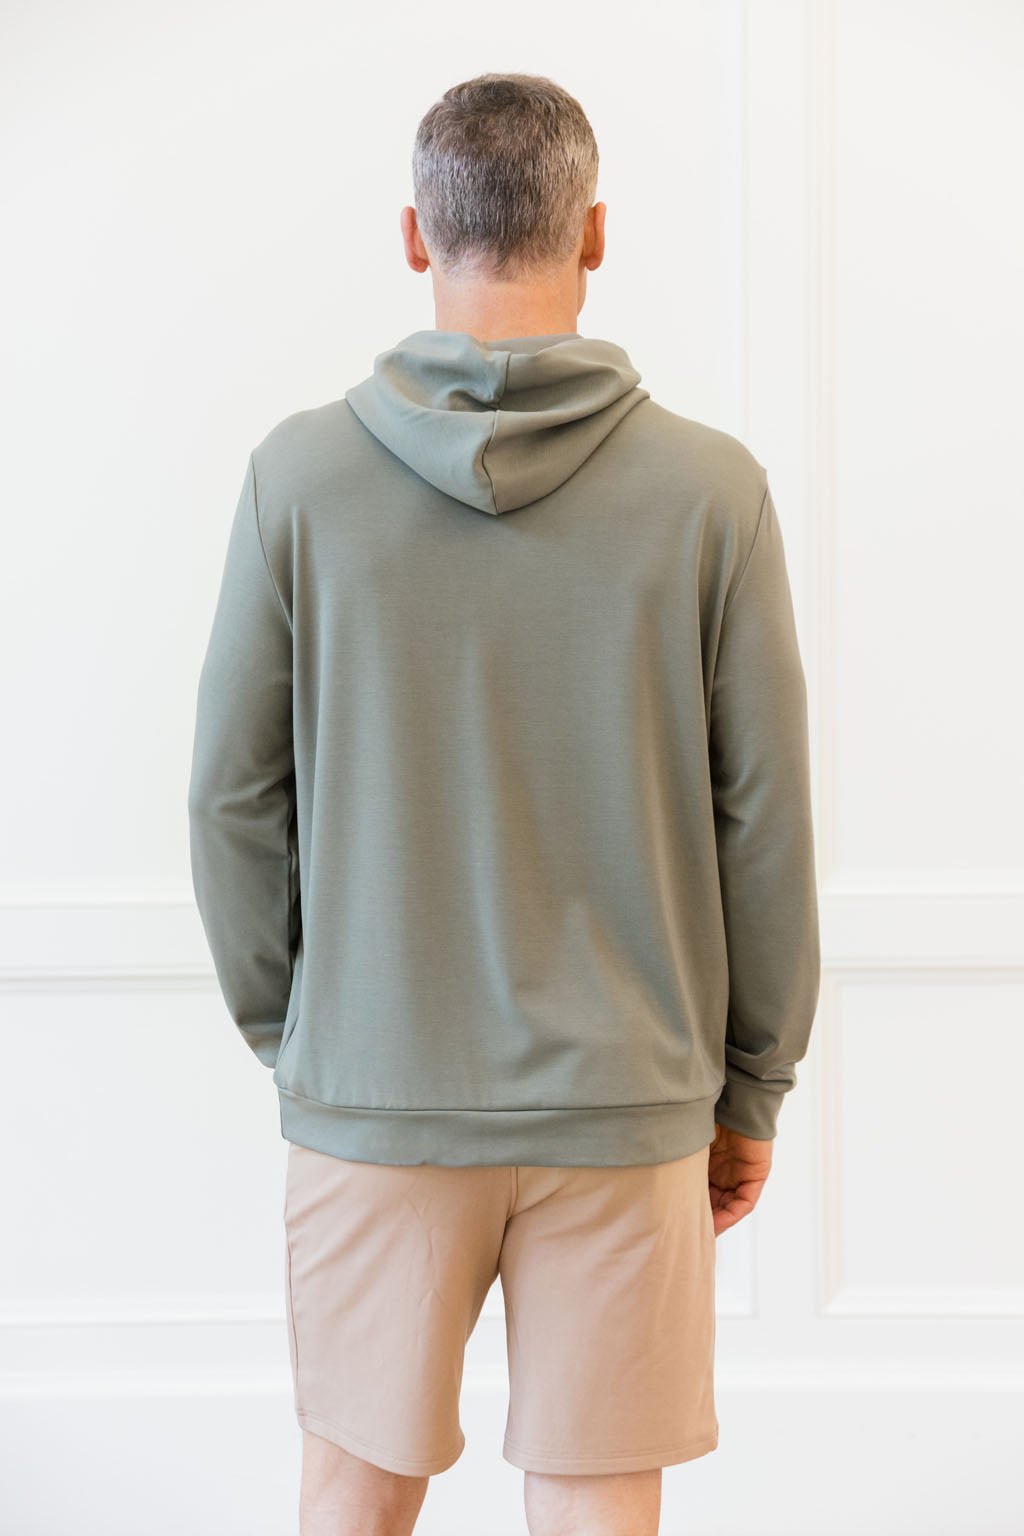 Moss Bamboo Hoodie worn by a man with his back facing the camera. The man is standing in front of white background.